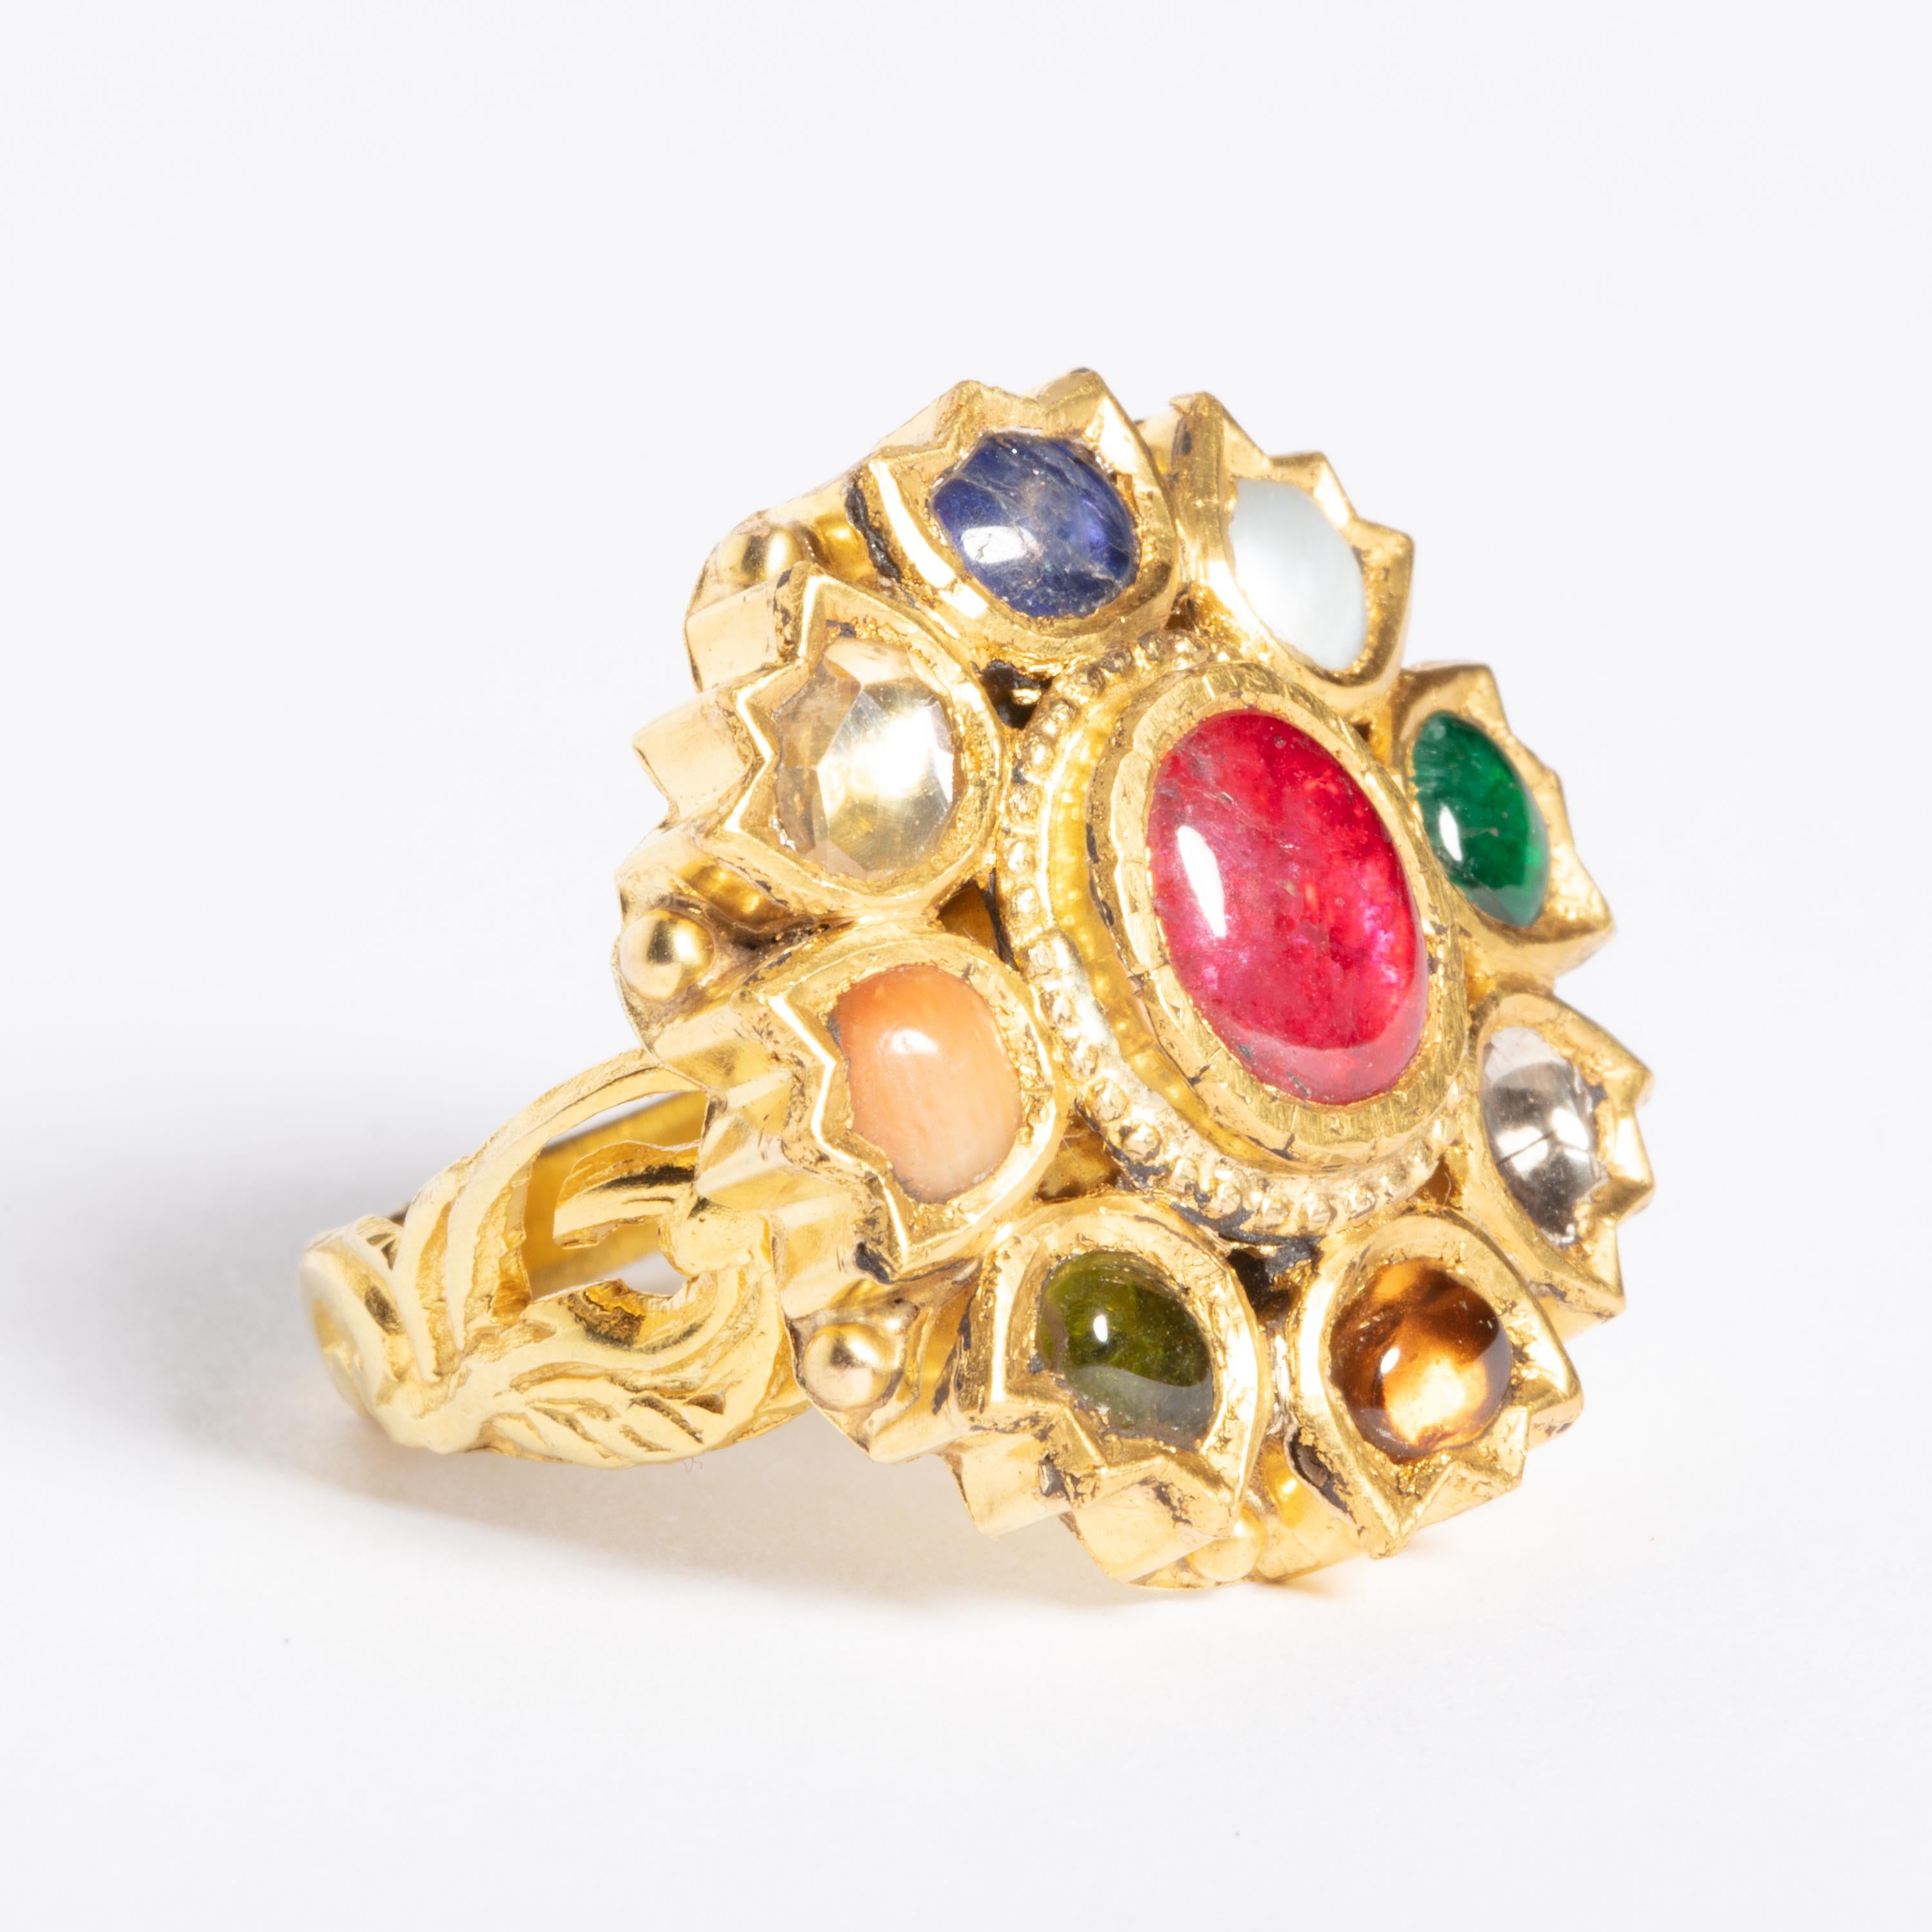 A 22K gold ring depicting the NavaRatna, a combinations of precious and semi-precious stones bringing good fortune to the wearer.  Hand-tooled workmanship with peacocks along the sides of the band.  Ring size is 7.5  Mid 1900's.

The mythology of